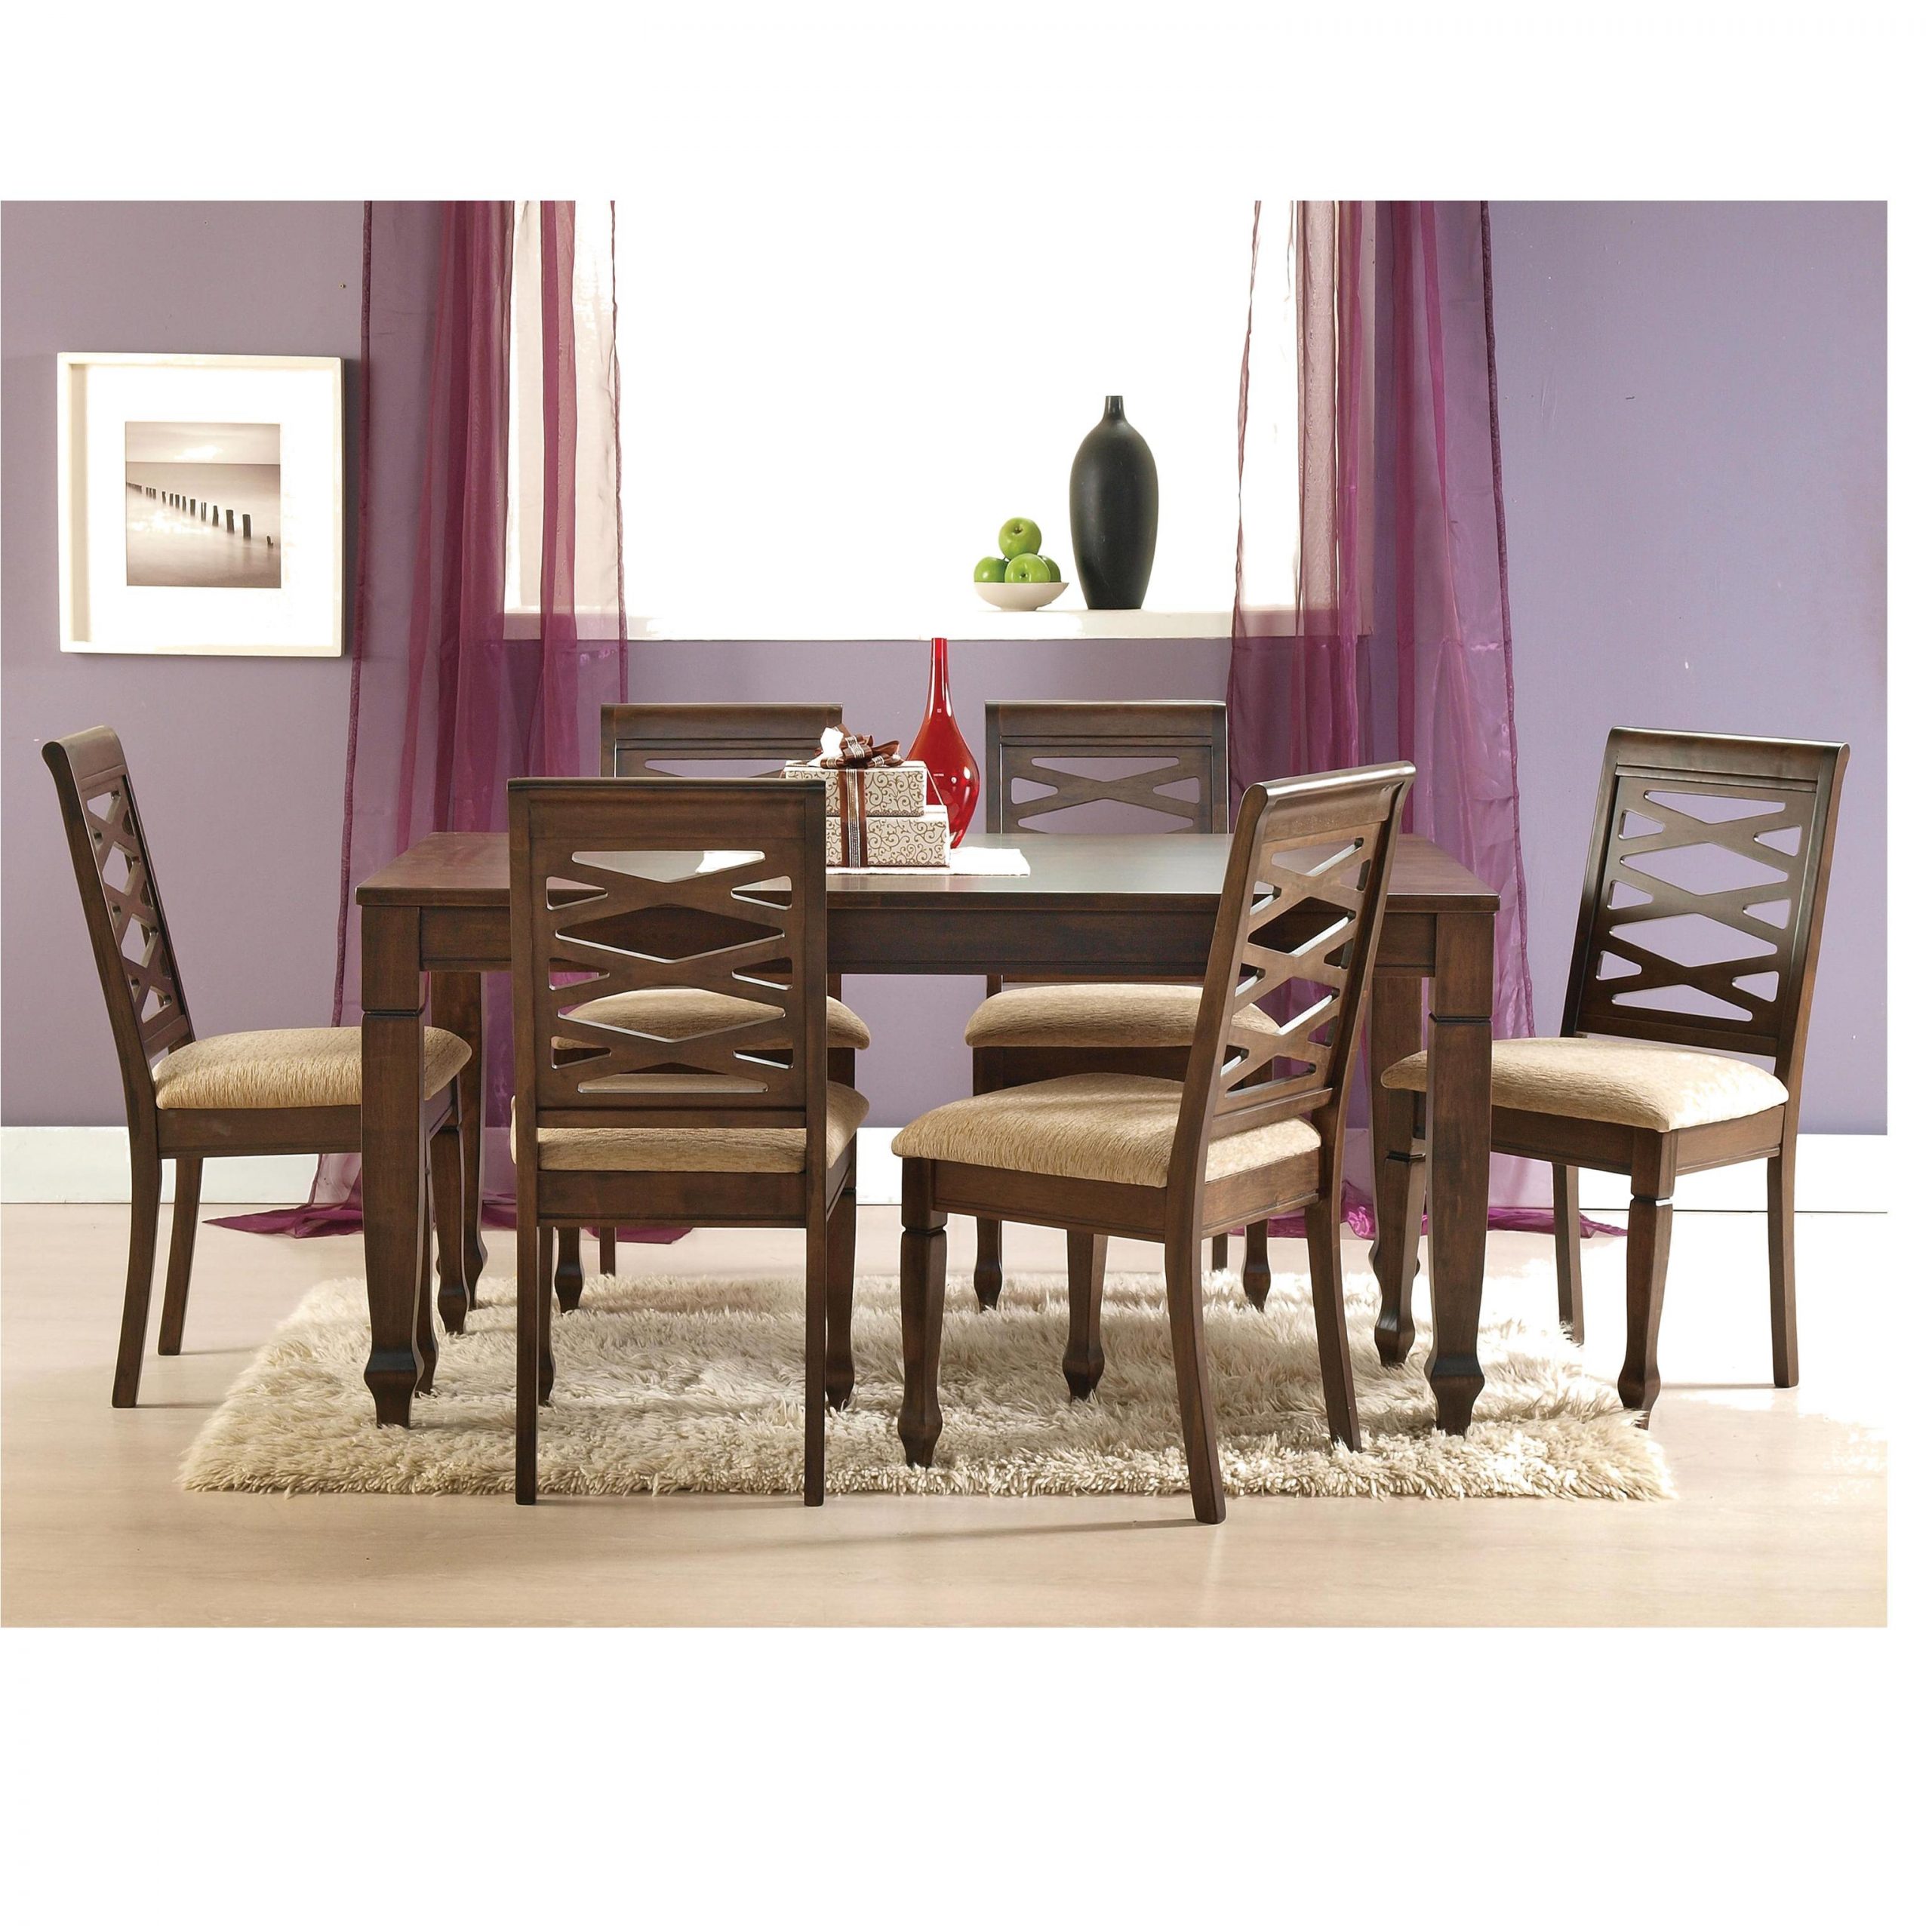 Nairobi 6 Seater Wooden Dining Table pertaining to size 3072 X 3072